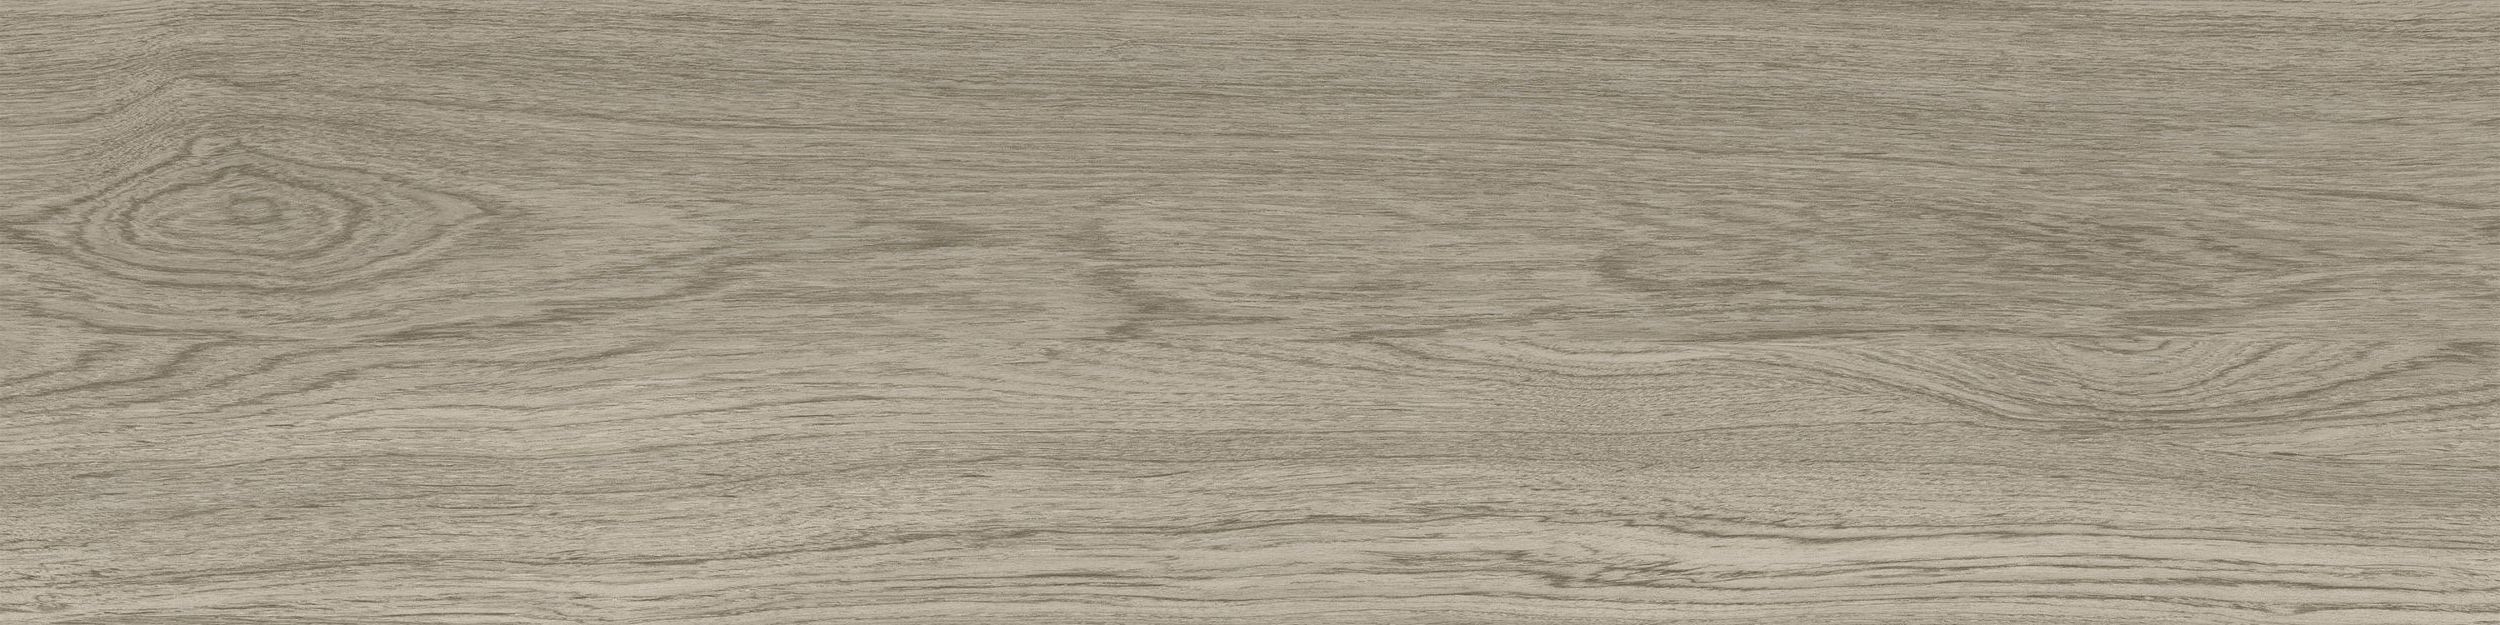 Natural Woodgrains LVT In Washed Wheat image number 1